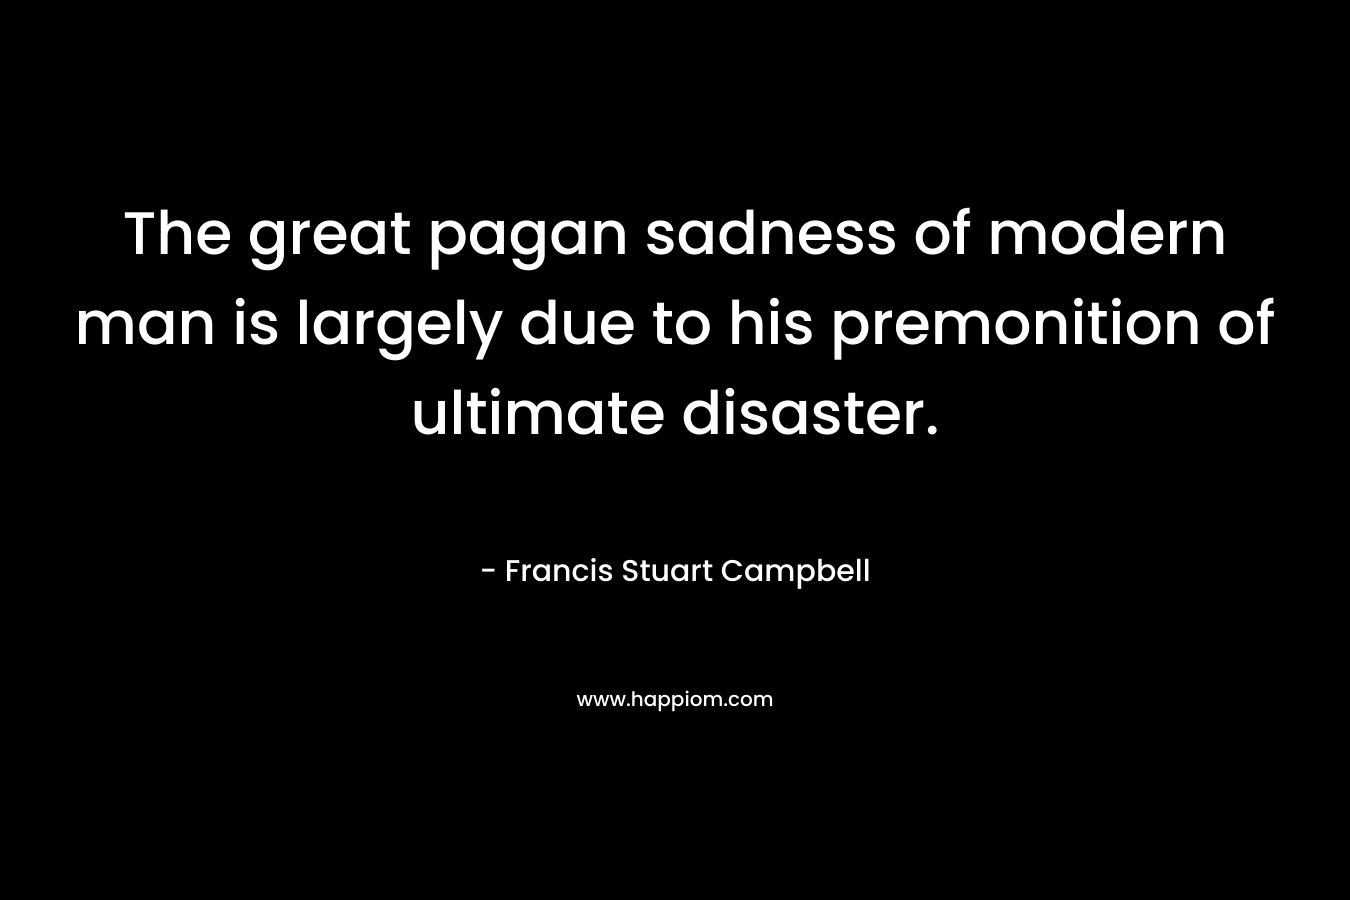 The great pagan sadness of modern man is largely due to his premonition of ultimate disaster. – Francis Stuart Campbell